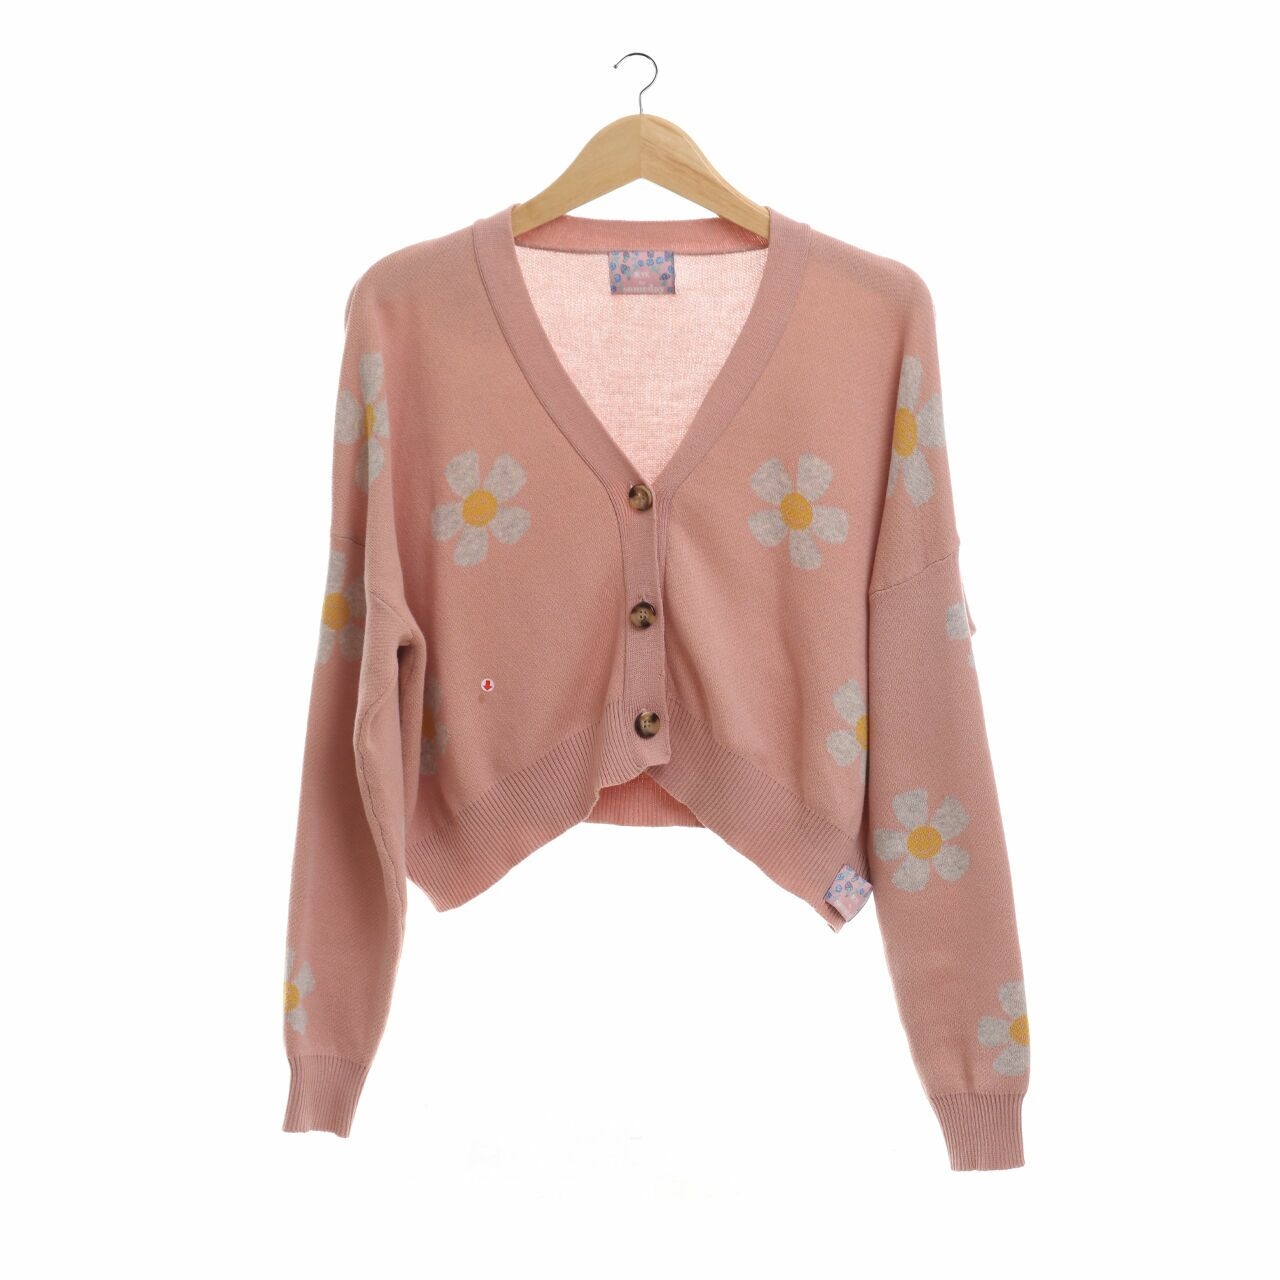 IKYK for Someday Dusty Pink Knit Floral Cardigan